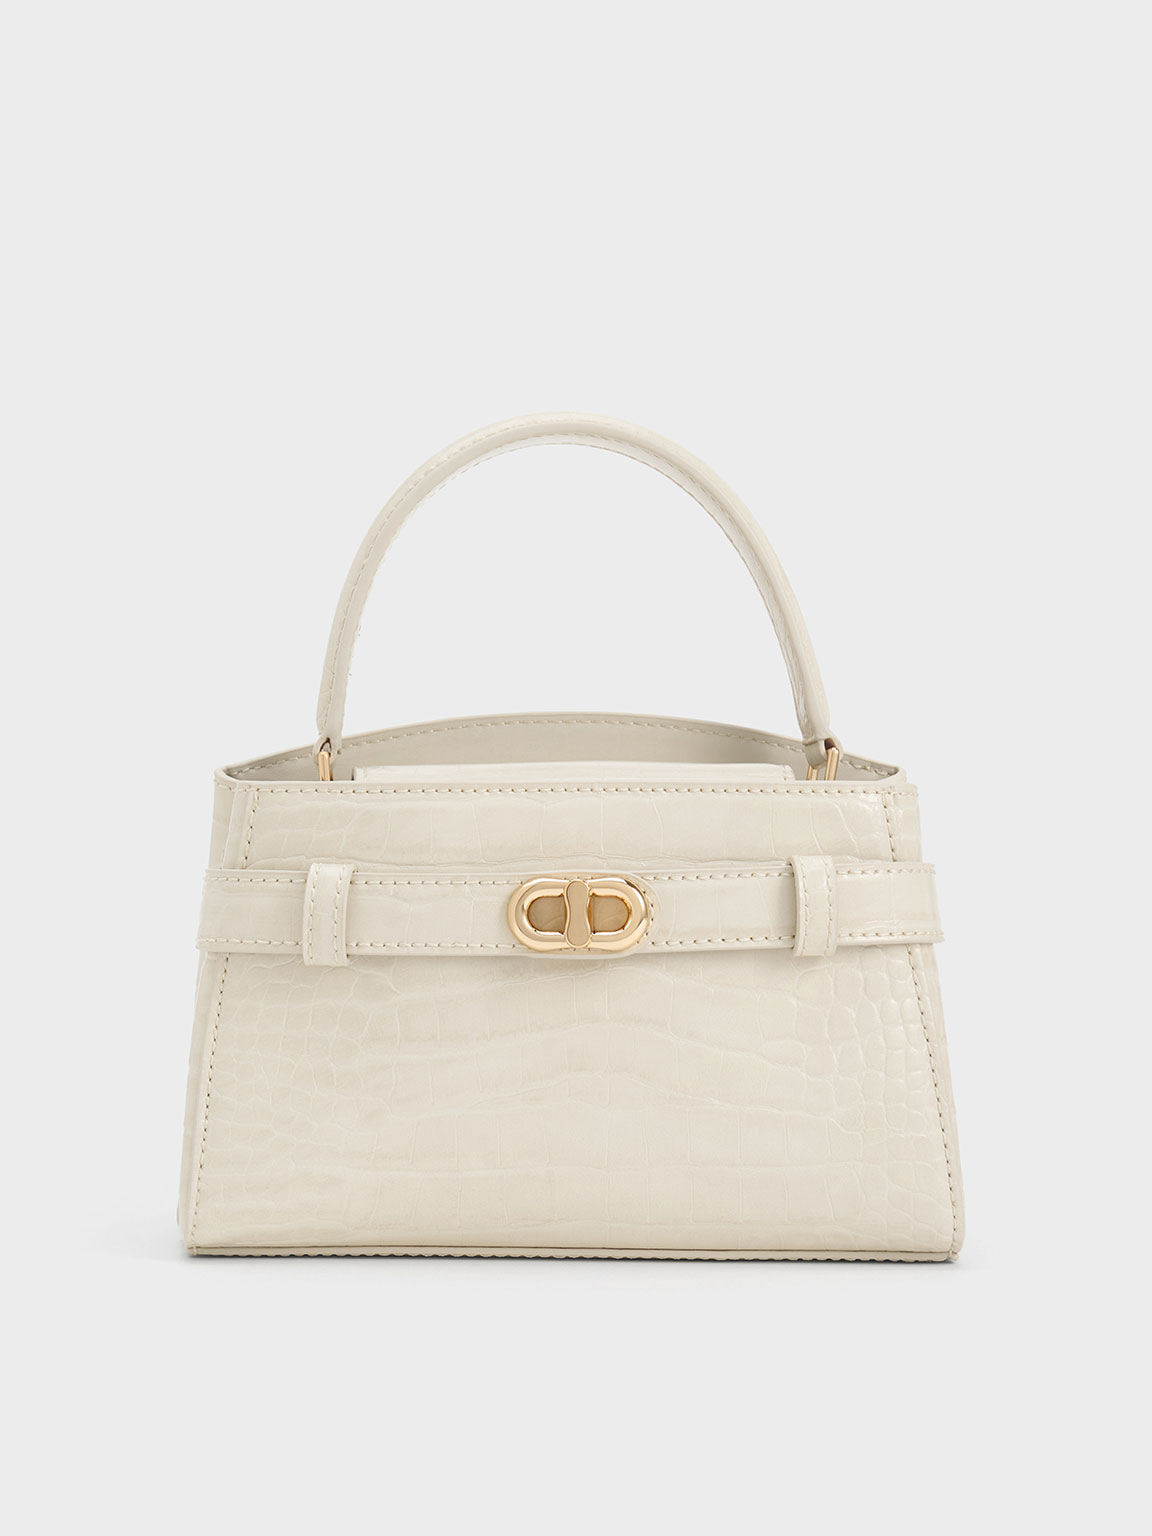 Ivory Aubrielle Croc-Effect Top Handle Bag - CHARLES & KEITH PH